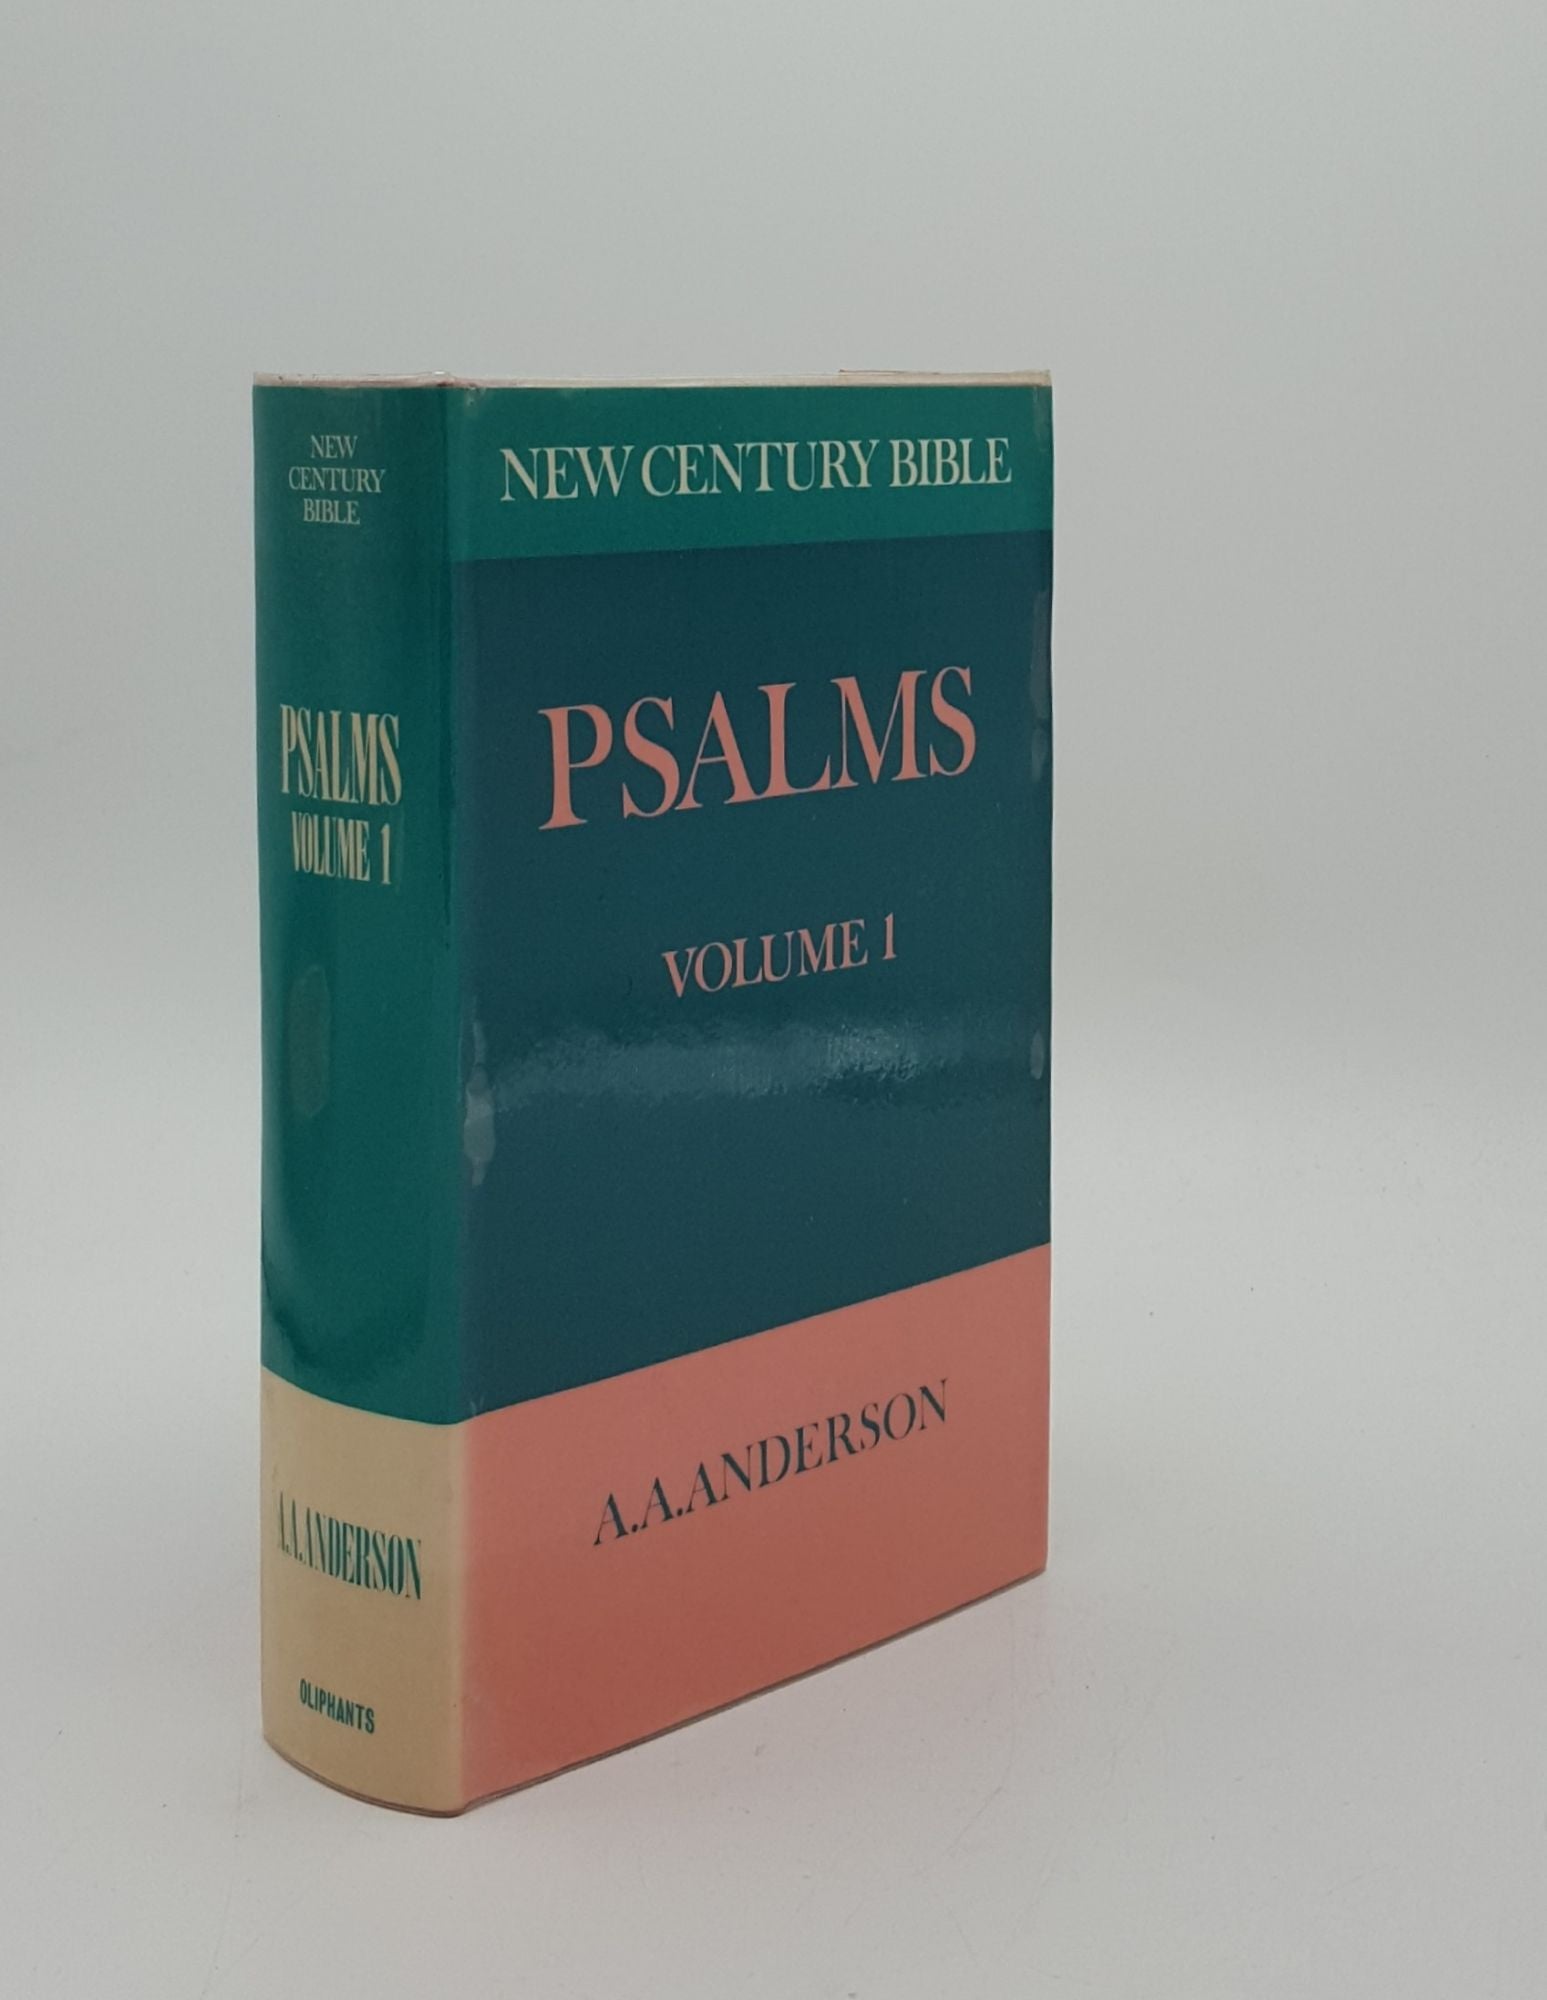 ANDERSON A.A. - The Book of Psalms Volume I Introduction and Psalms 1-71 [&] Volume II Psalms 73-150 New Century Bible